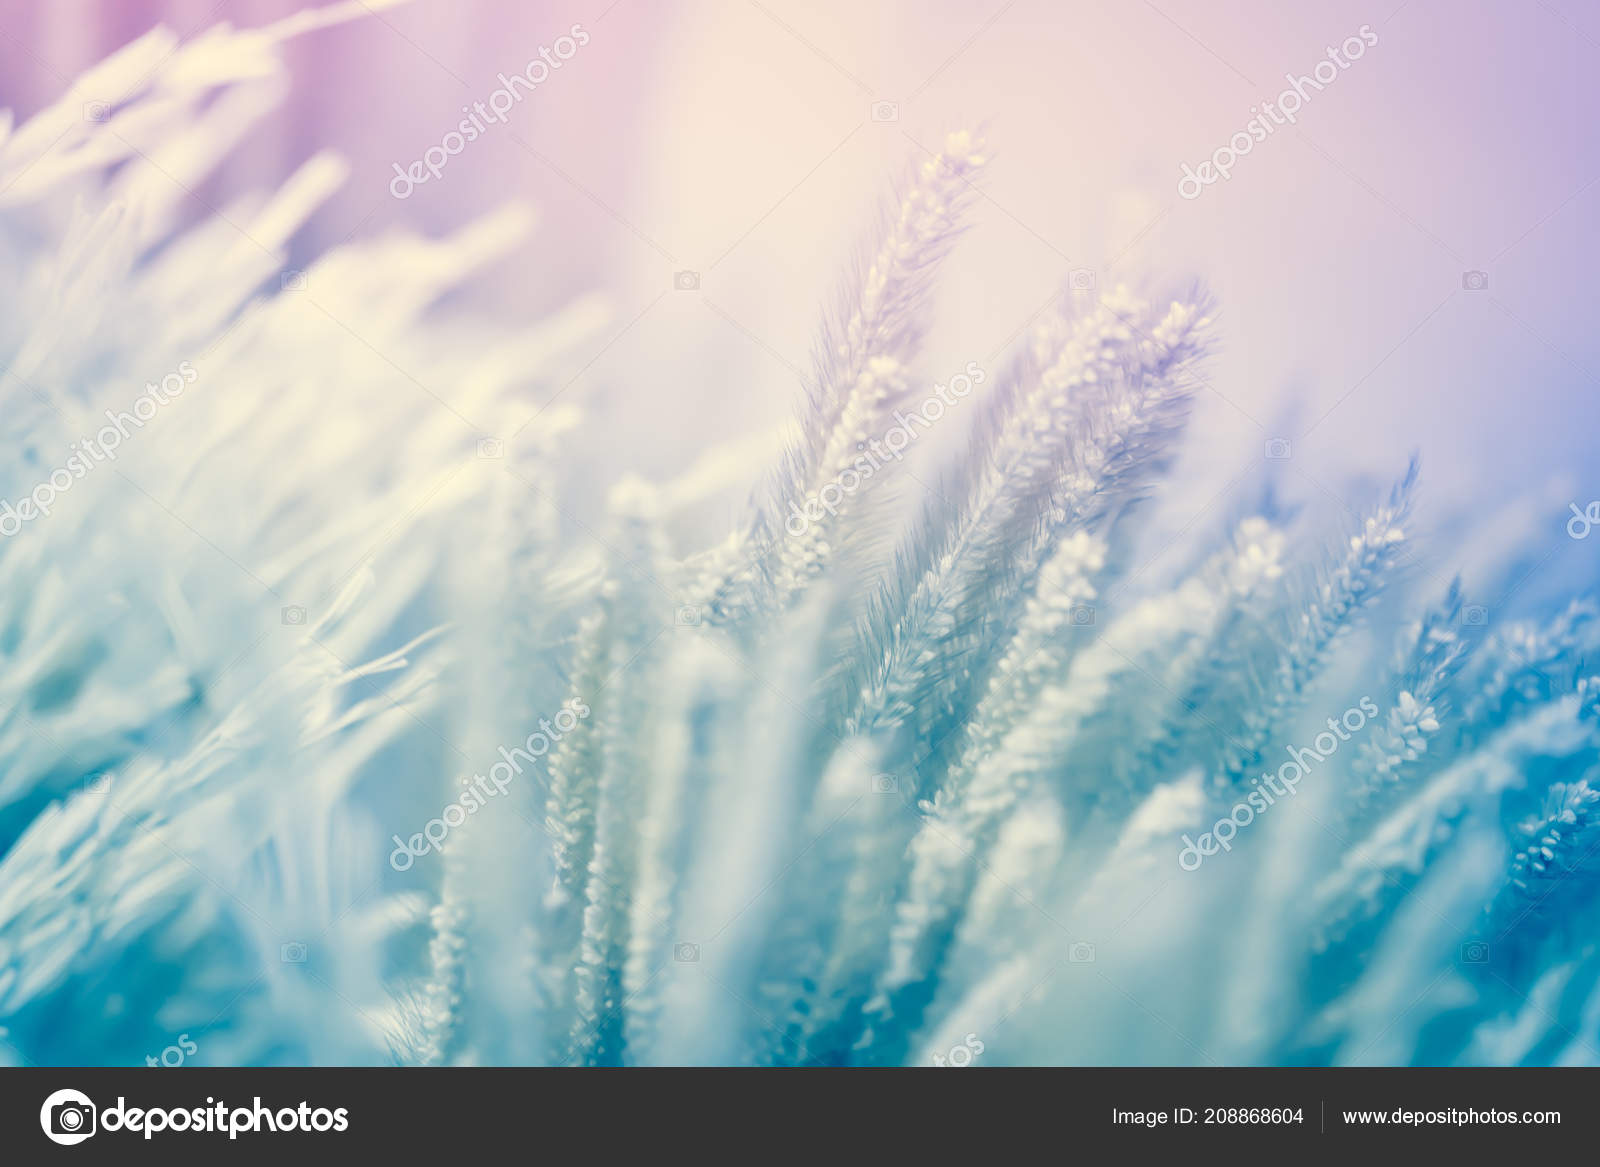 Background Bright Light Beautiful Color Blur Stock Photo 208868604